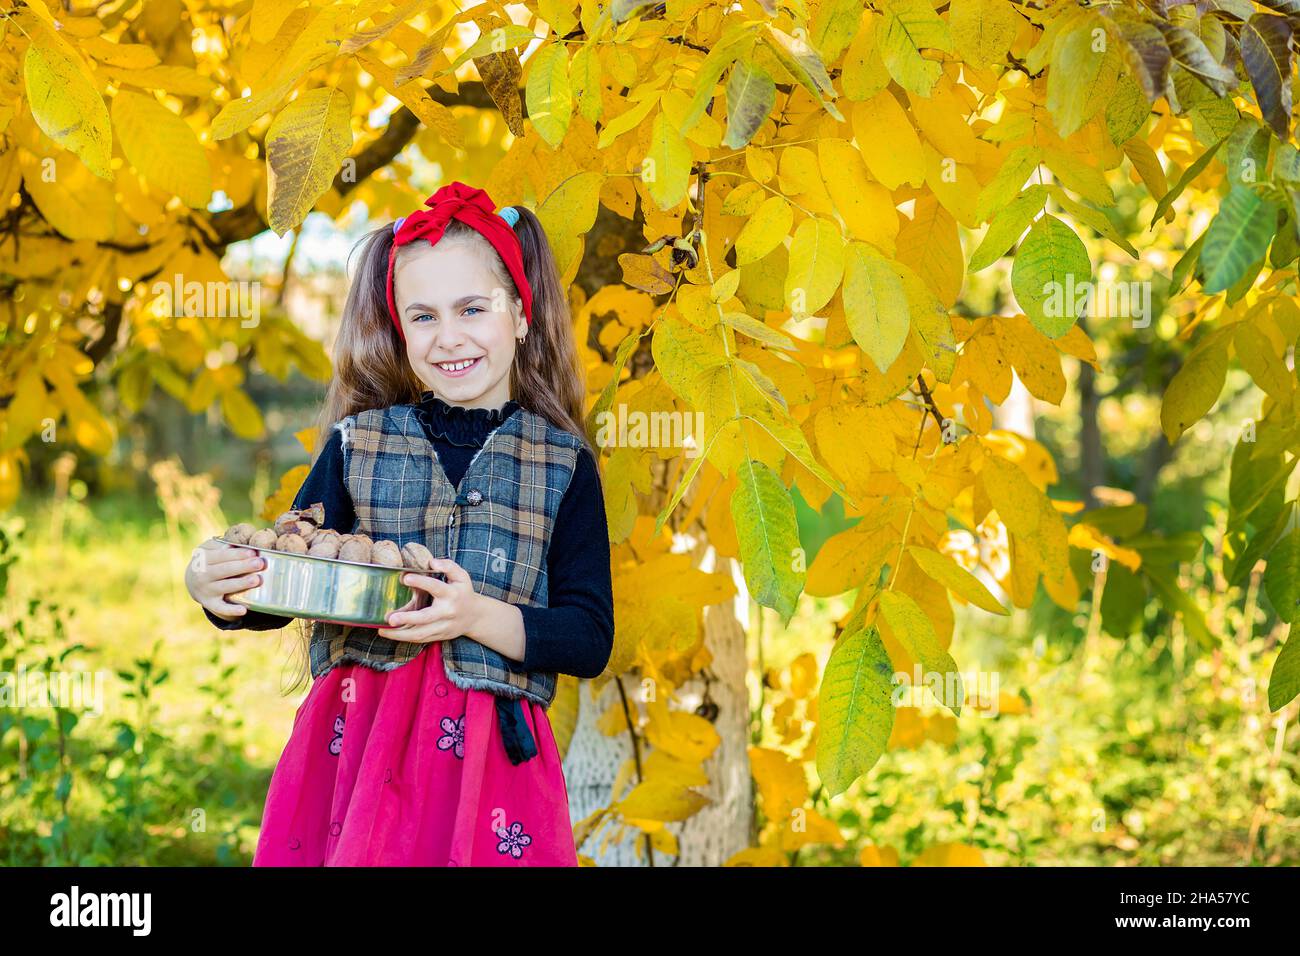 Cute girl with walnuts from the walnut harvest in the garden. Colorful and blurred walnut, located in the background. Stock Photo